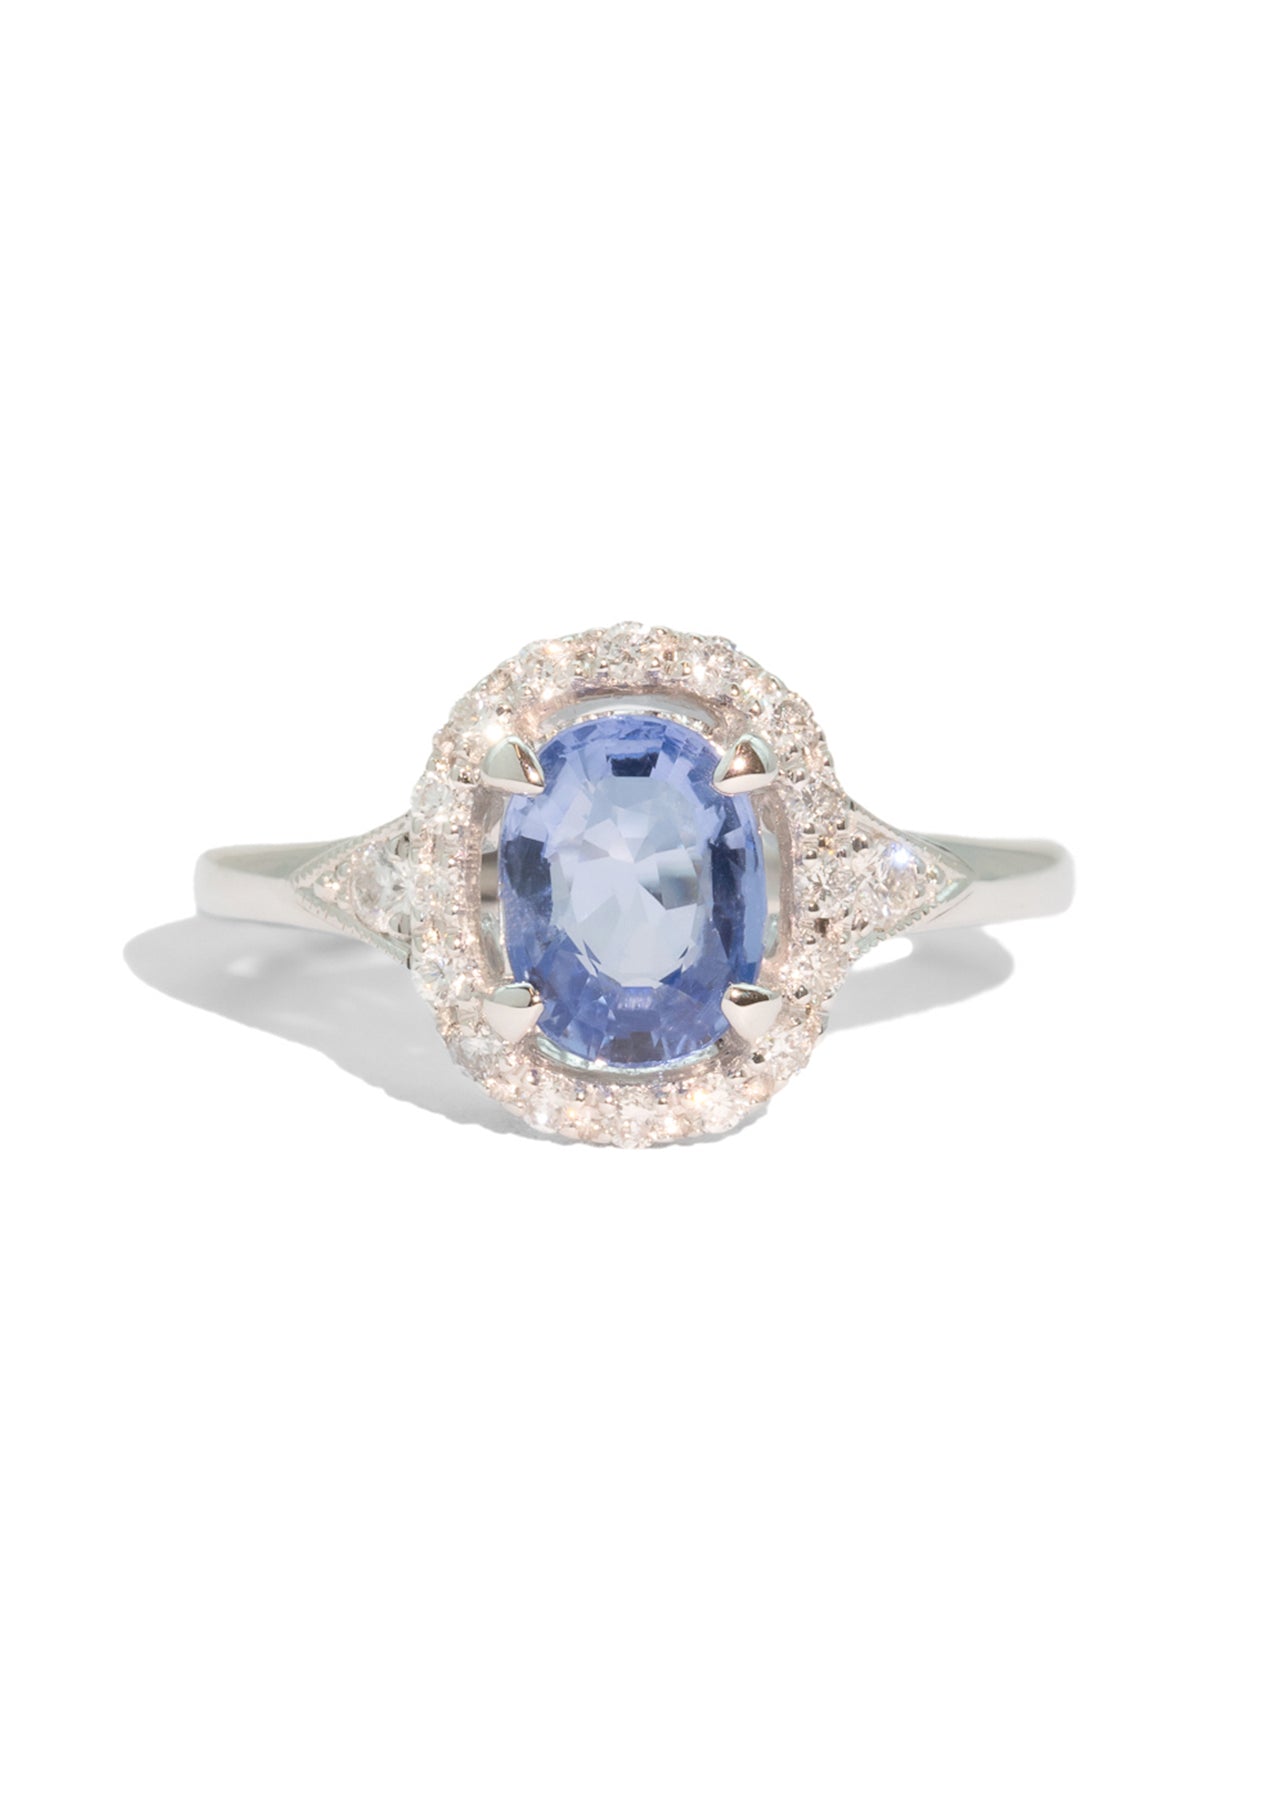 The Eliza Ring with 1.59ct Ceylon Sapphire